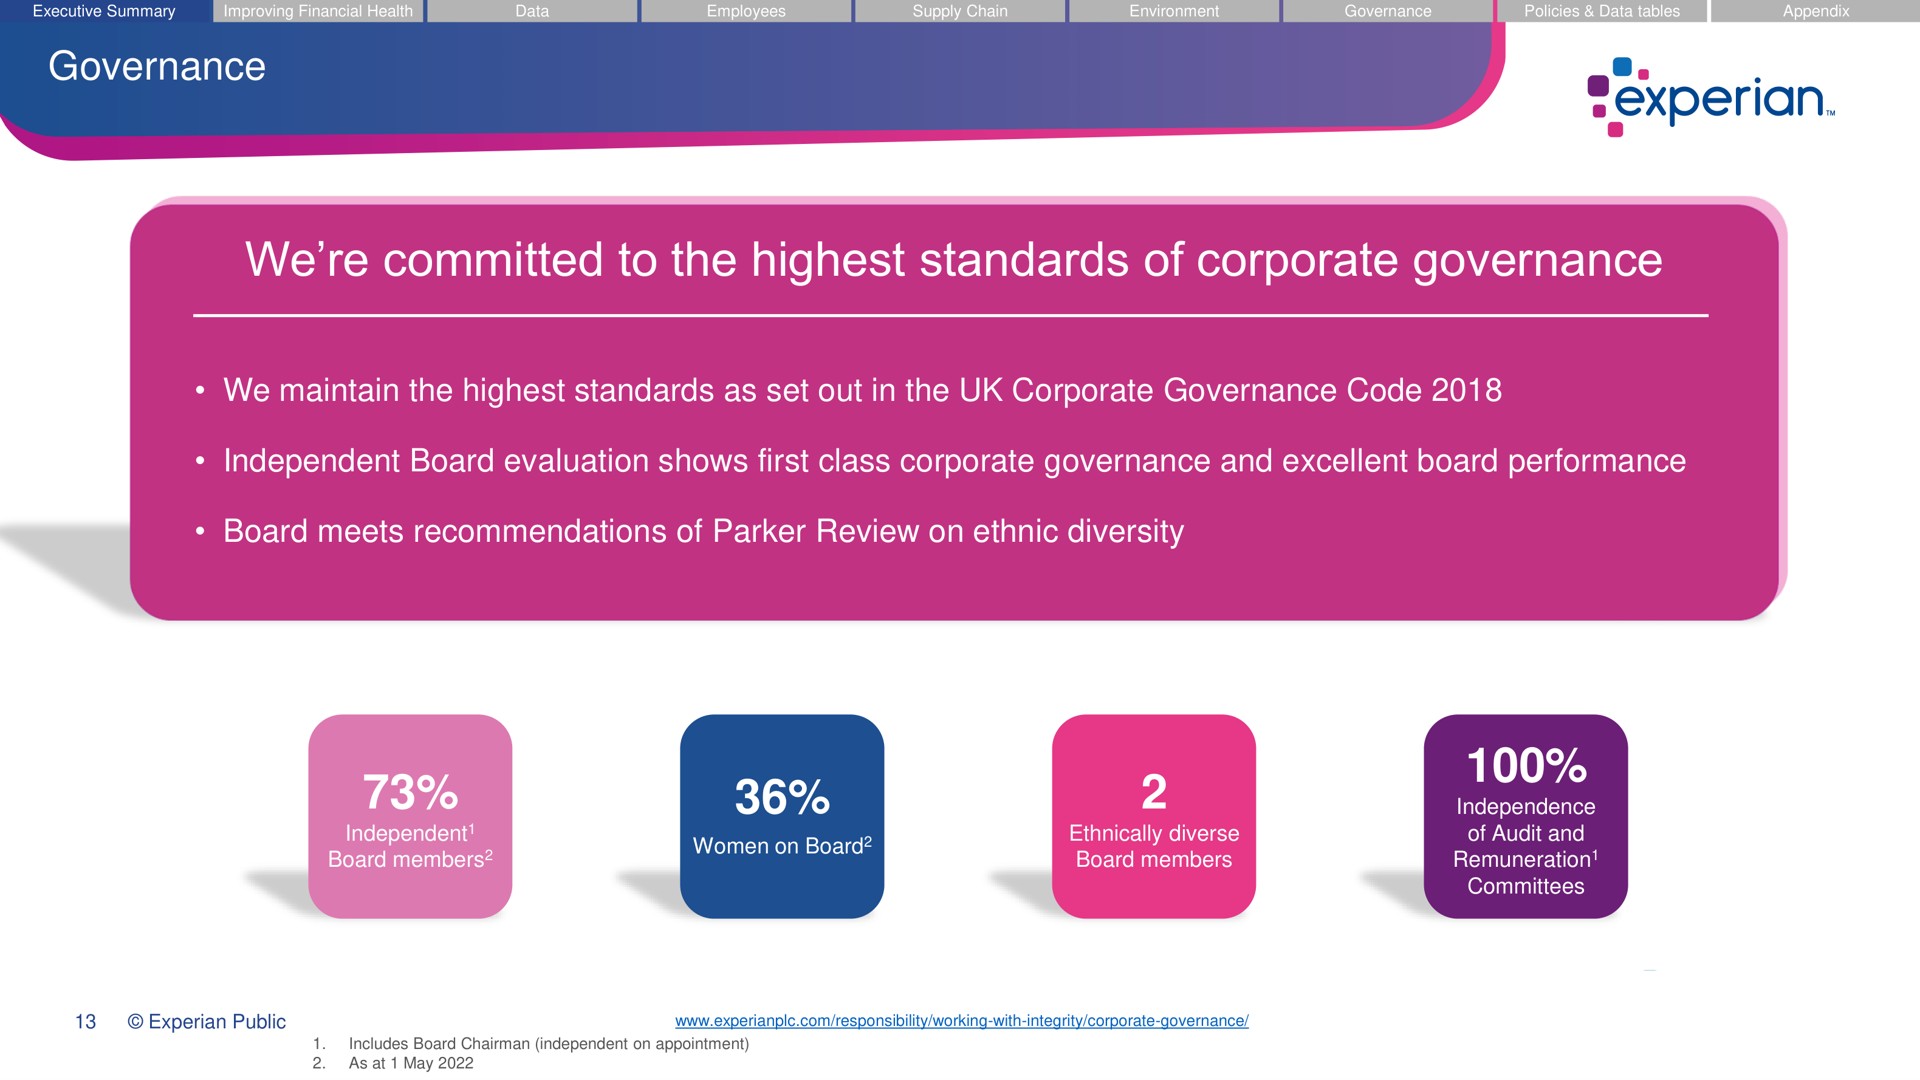 governance we committed to the highest standards of corporate governance we maintain the highest standards as set out in the corporate governance code independent board evaluation shows first class corporate governance and excellent board performance board meets recommendations of parker review on ethnic diversity independent board members women on board ethnically diverse board members independence of audit and remuneration committees tew | Experian